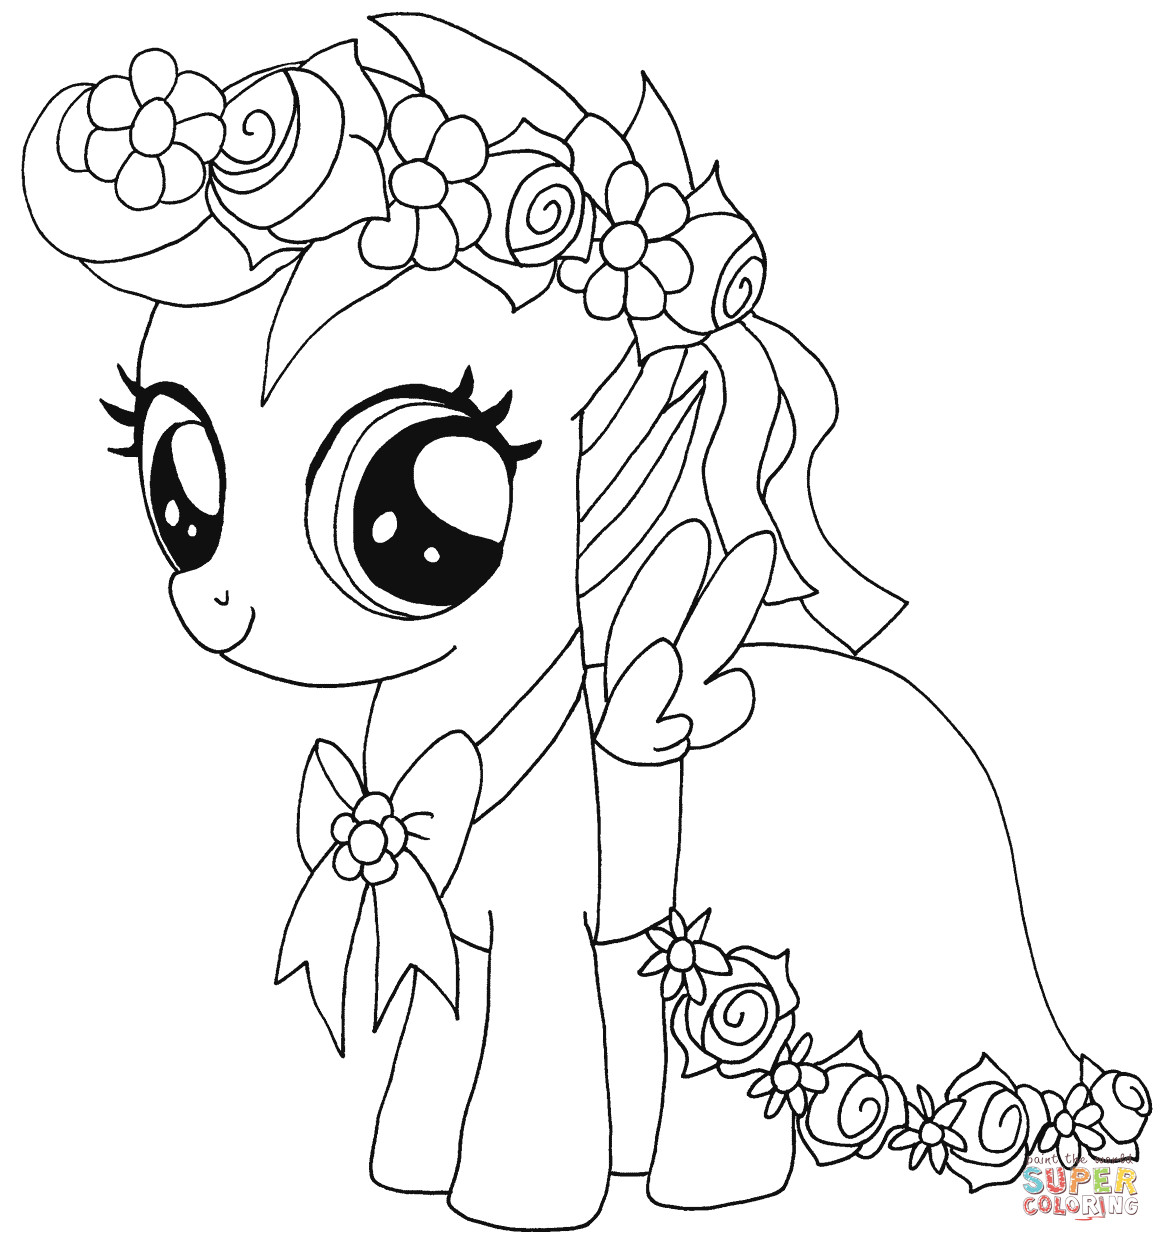 Printable My Little Pony Coloring Pages
 My Little Pony Scootaloo coloring page